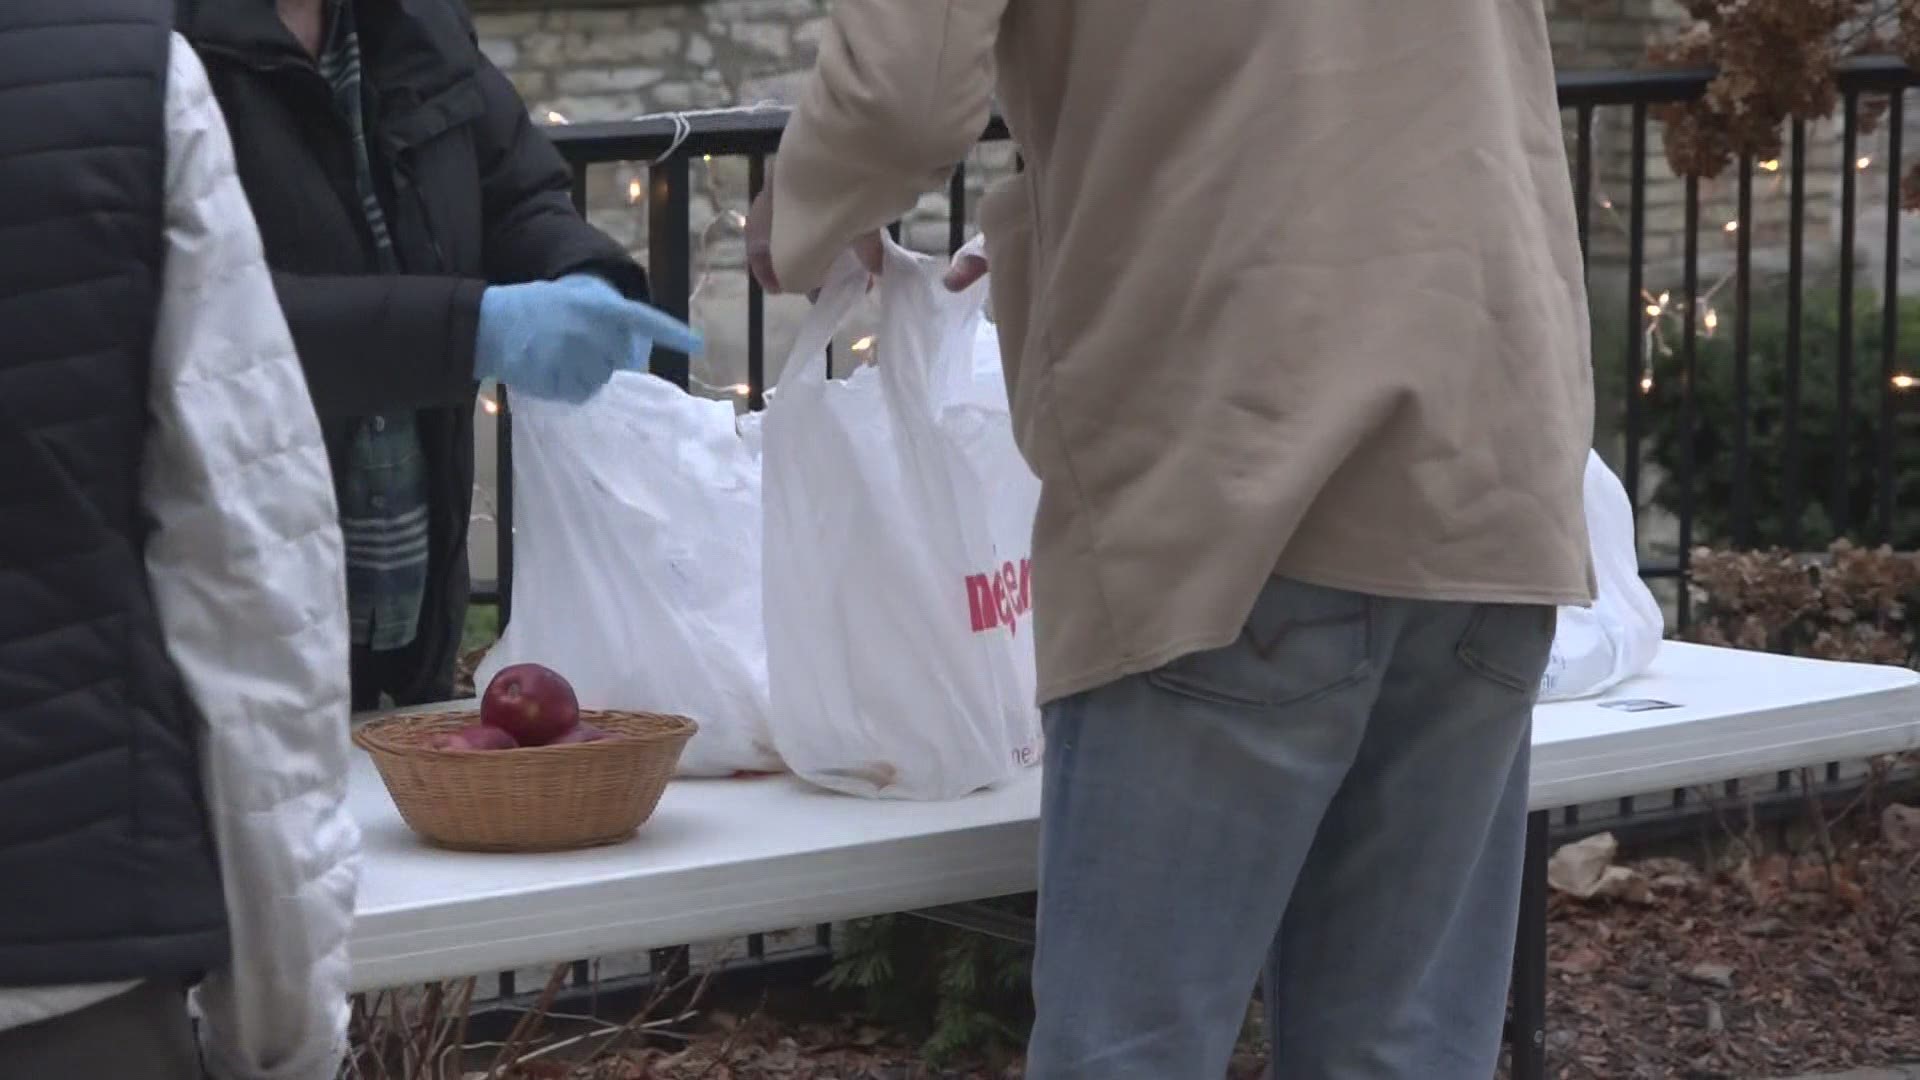 For 12 years, St. Mark's Episcopal Church has been serving breakfast for those in need Saturday mornings at their location in Downtown Grand Rapids.